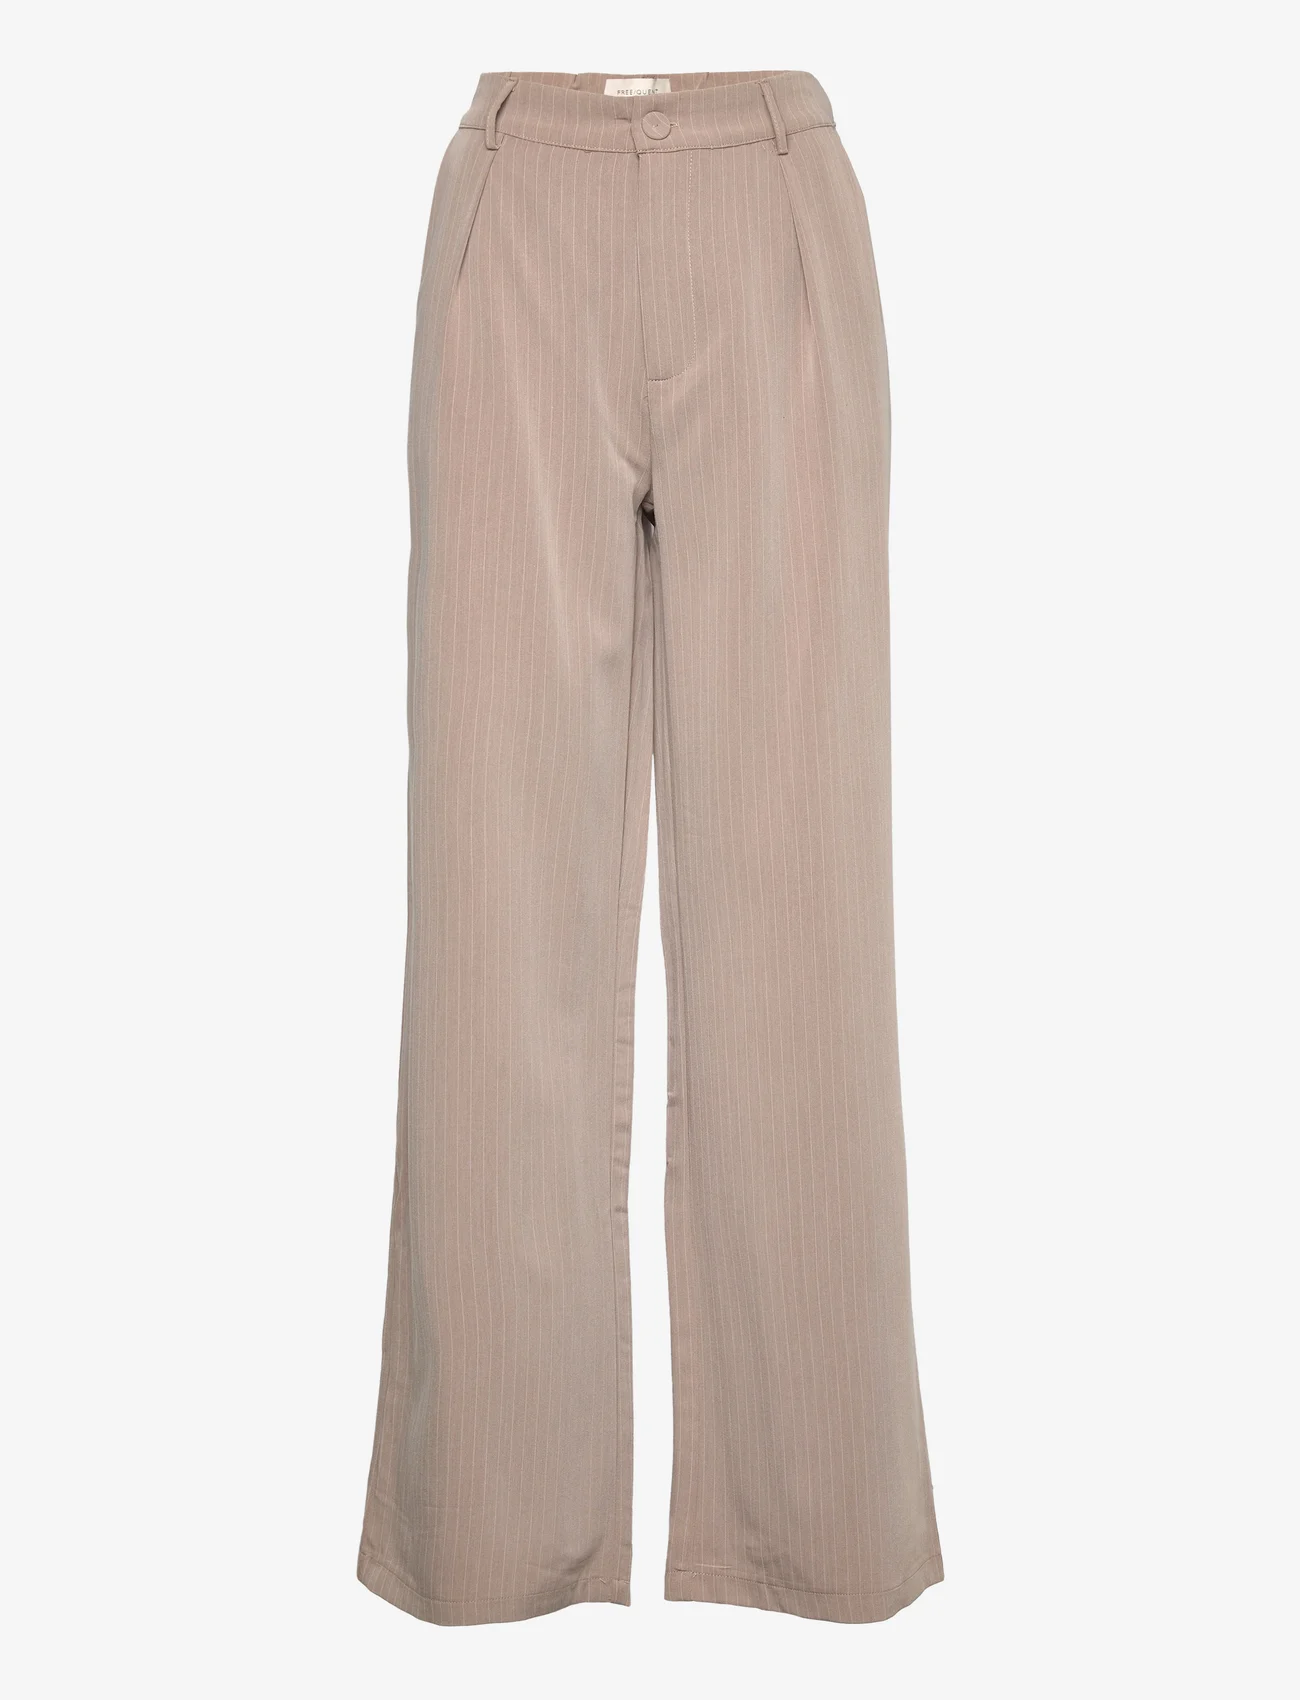 FREE/QUENT - FQKITTAY-PANT - formell - desert taupe melange - 0